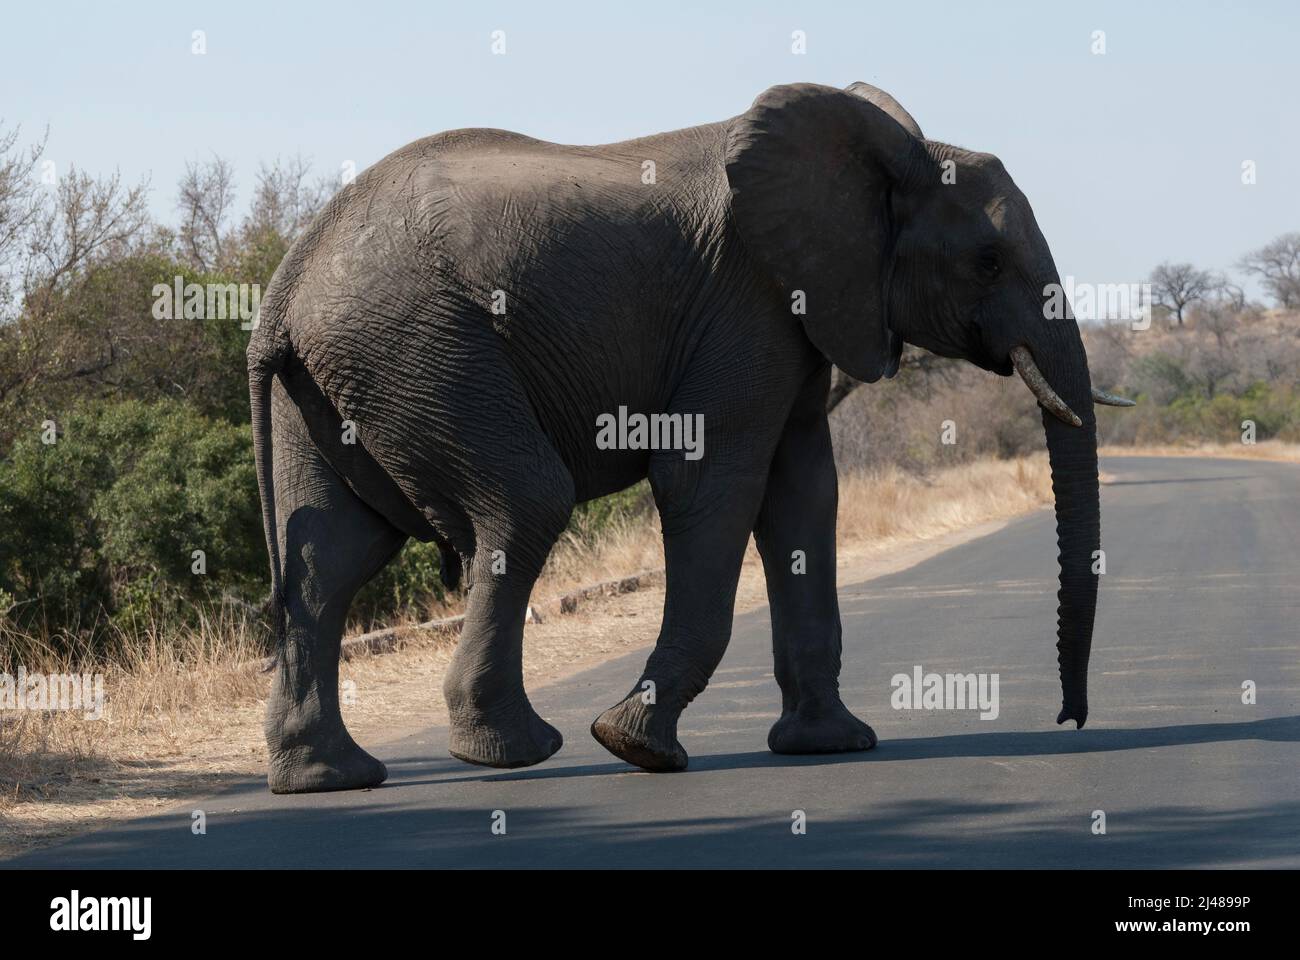 A large African elephant in the Kruger National Park, South Africa Stock Photo